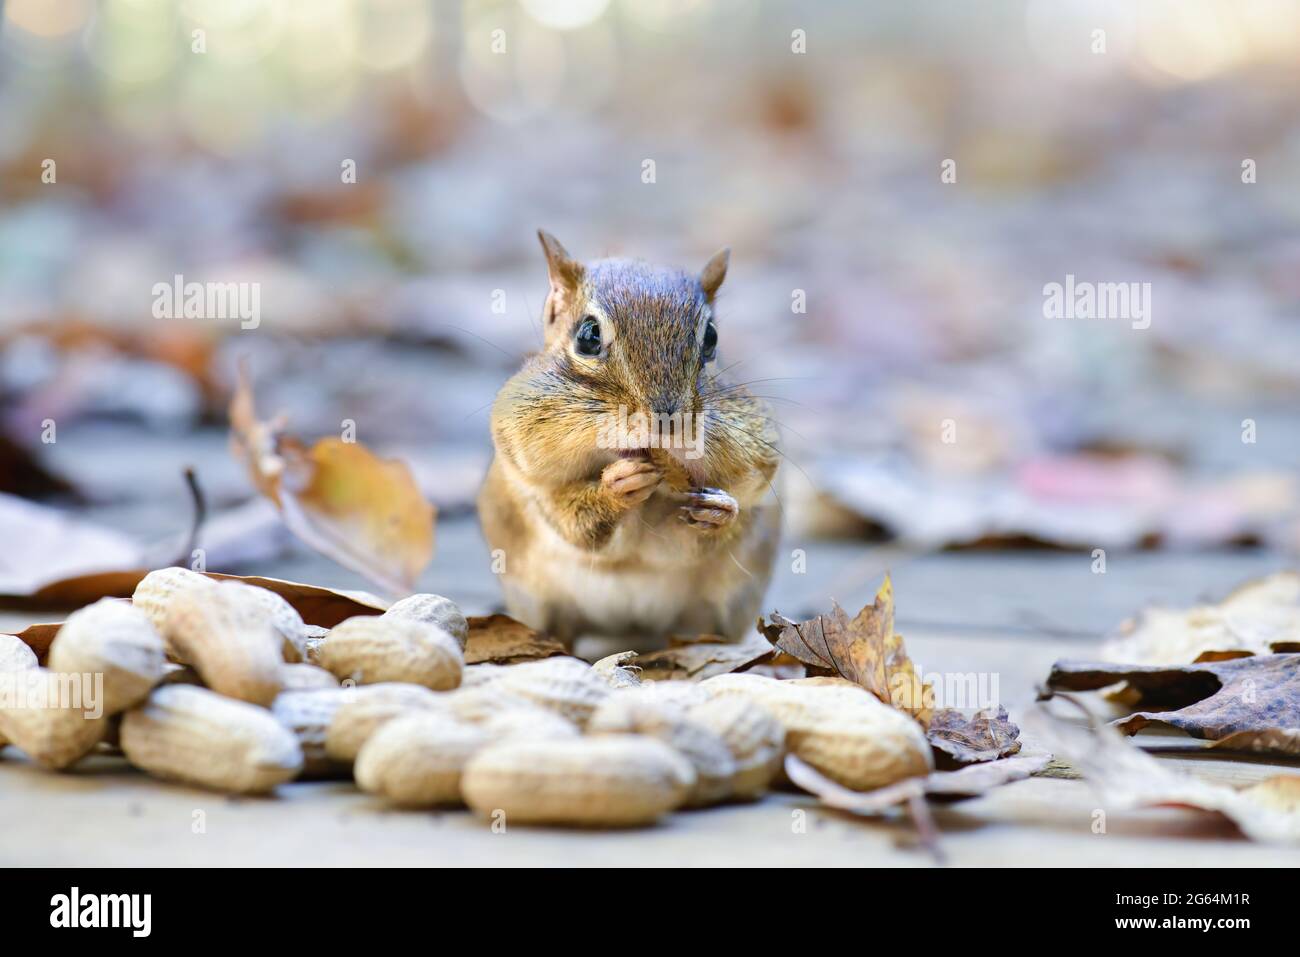 A squirrel sitting outdoors stuffing his face with peanuts. Stock Photo